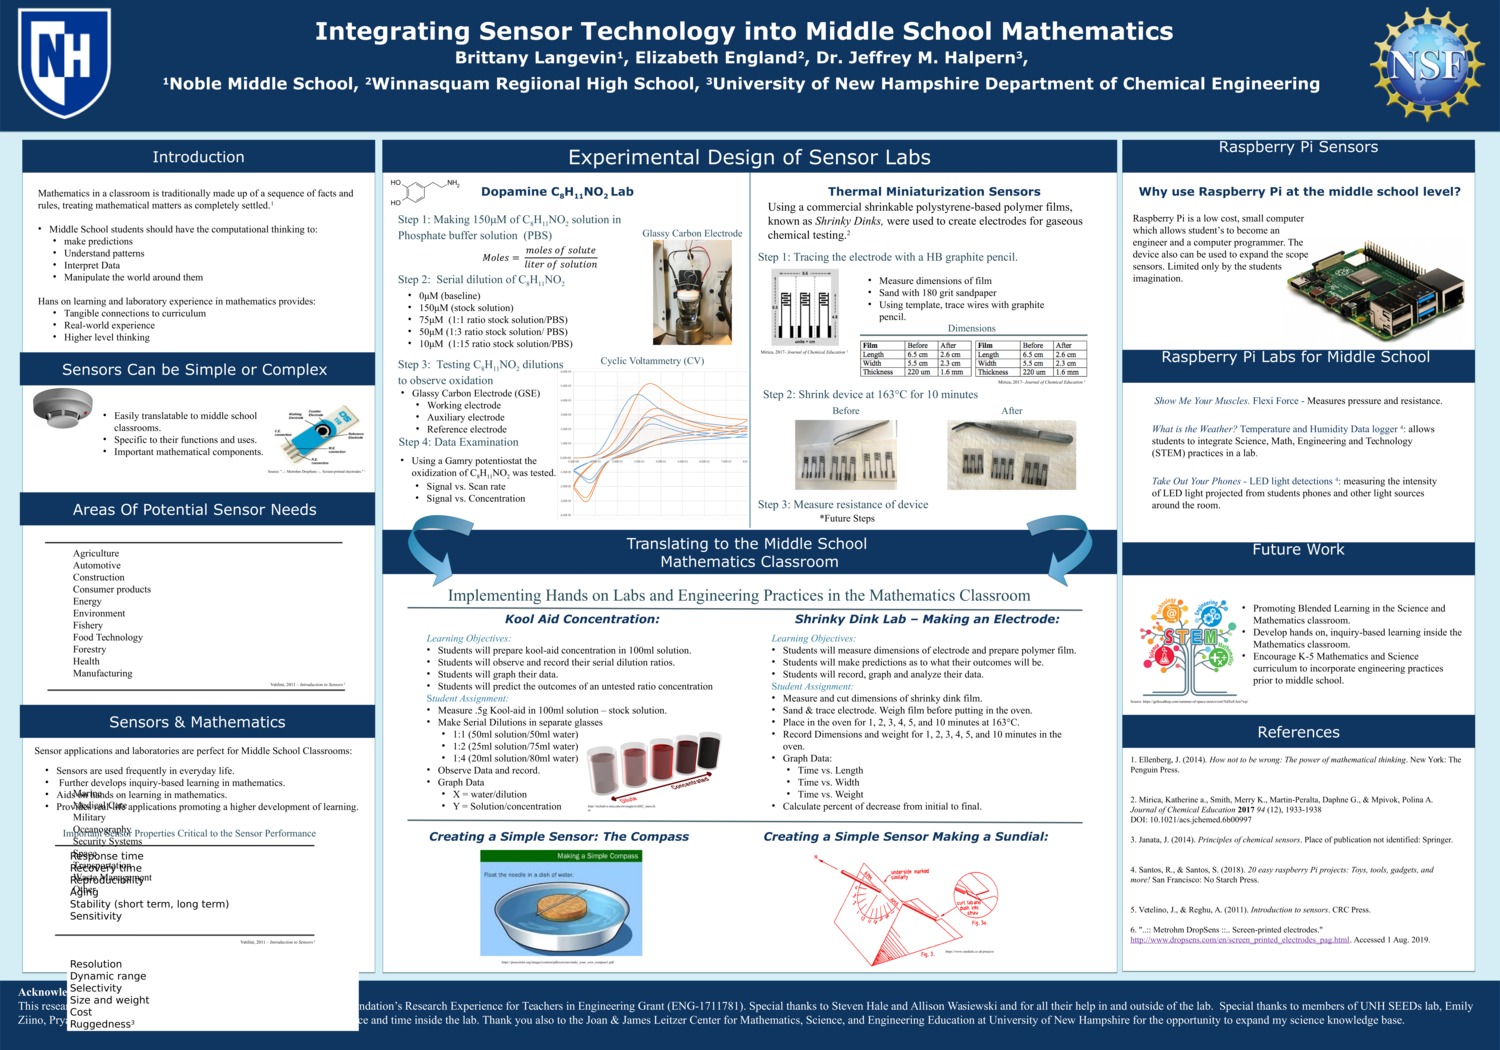 Integrating Sensor Technology Into Middle School Mathematics by bml1019